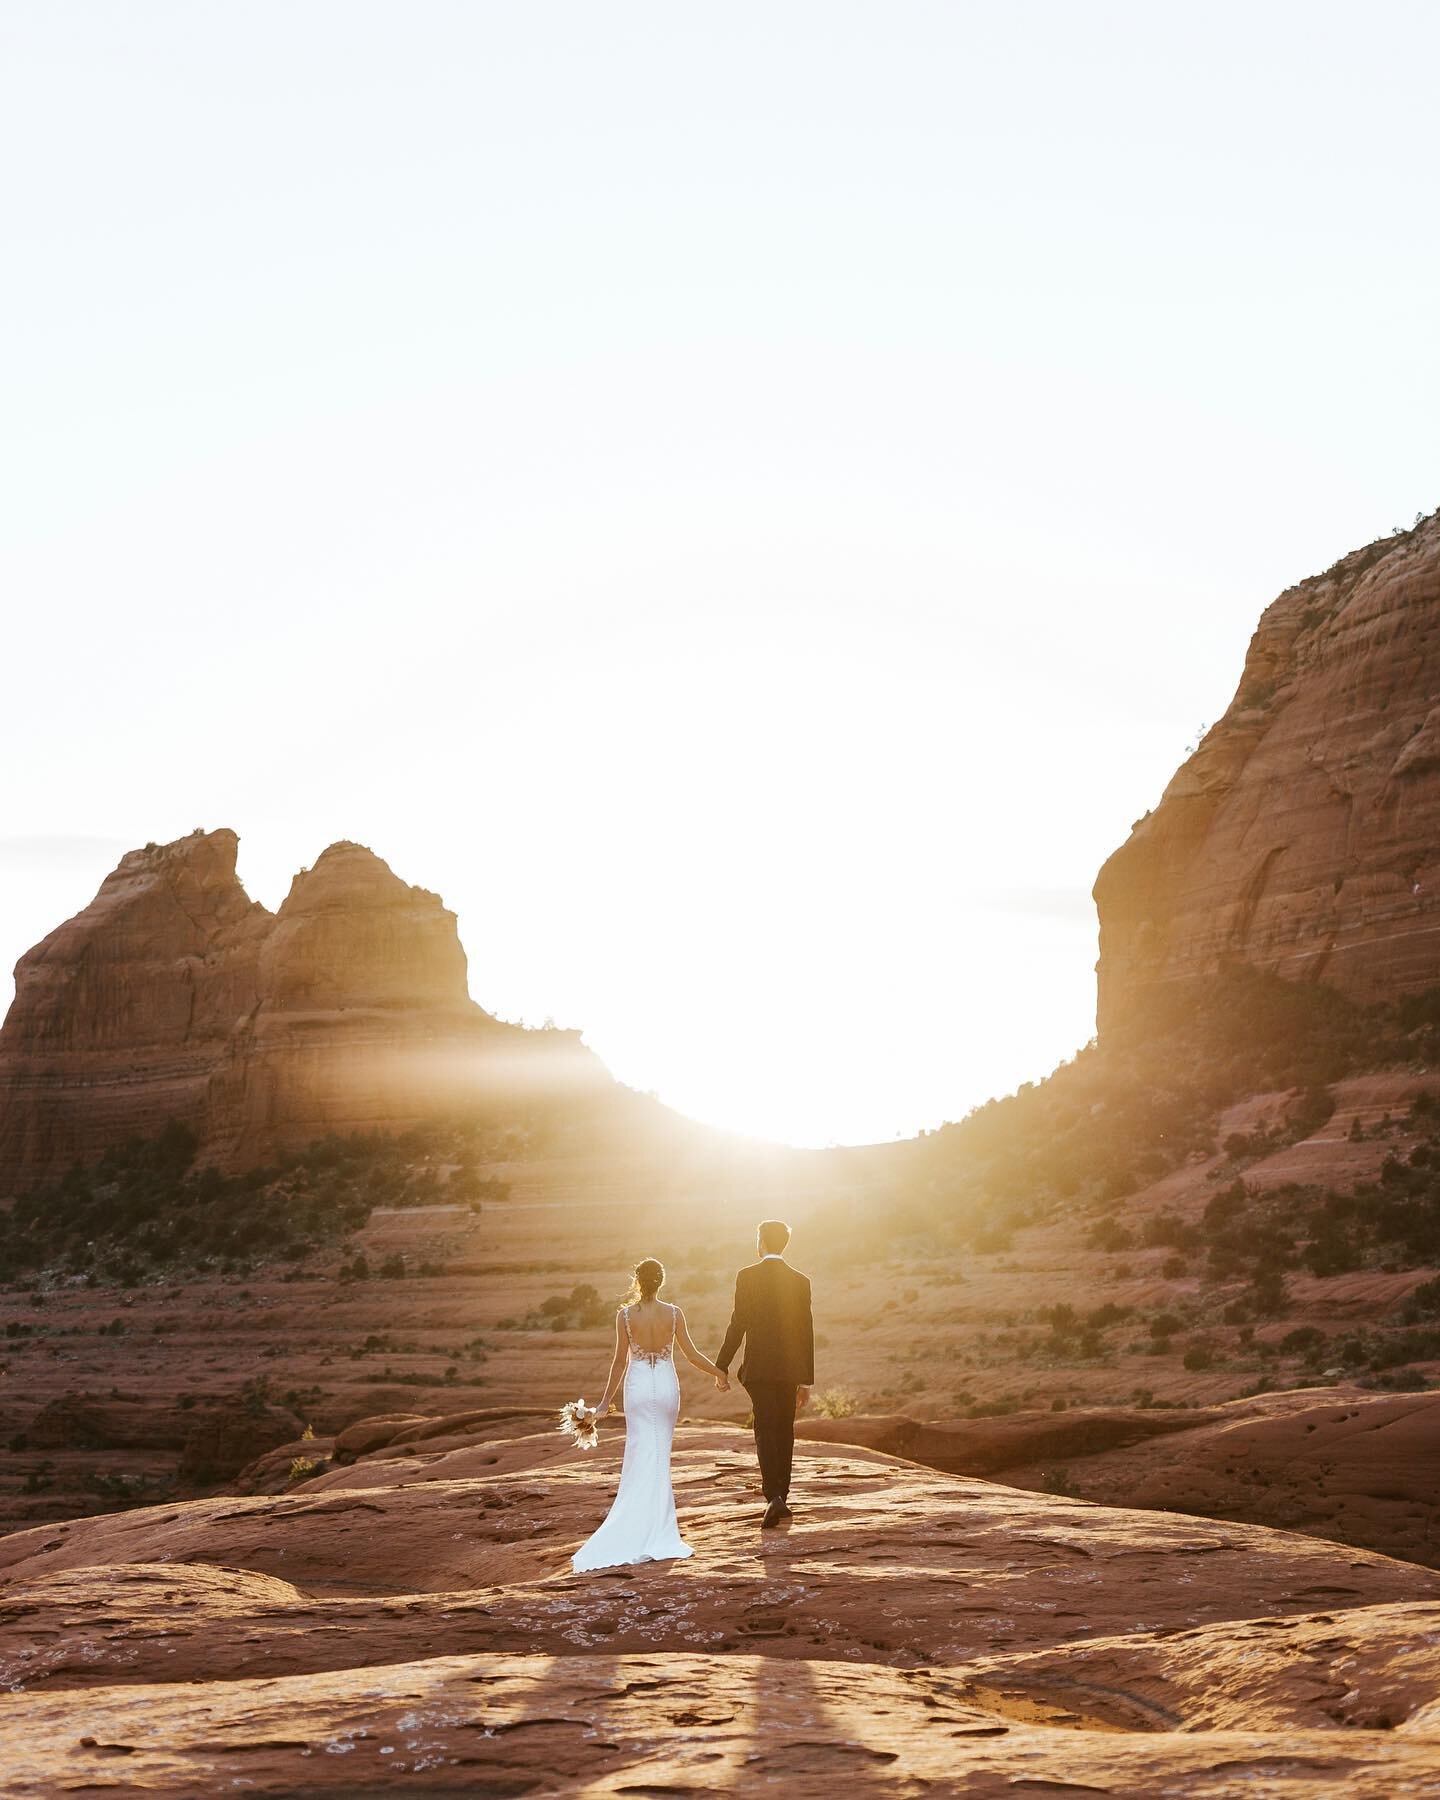 Chelsie &amp; Brandt had this whole spot to themselves on their elopement day in Sedona. While Sedonie can get pretty busy, there are still plenty of spots to get away from crowds and say your vows in private surronded by the res rocks. Their day was